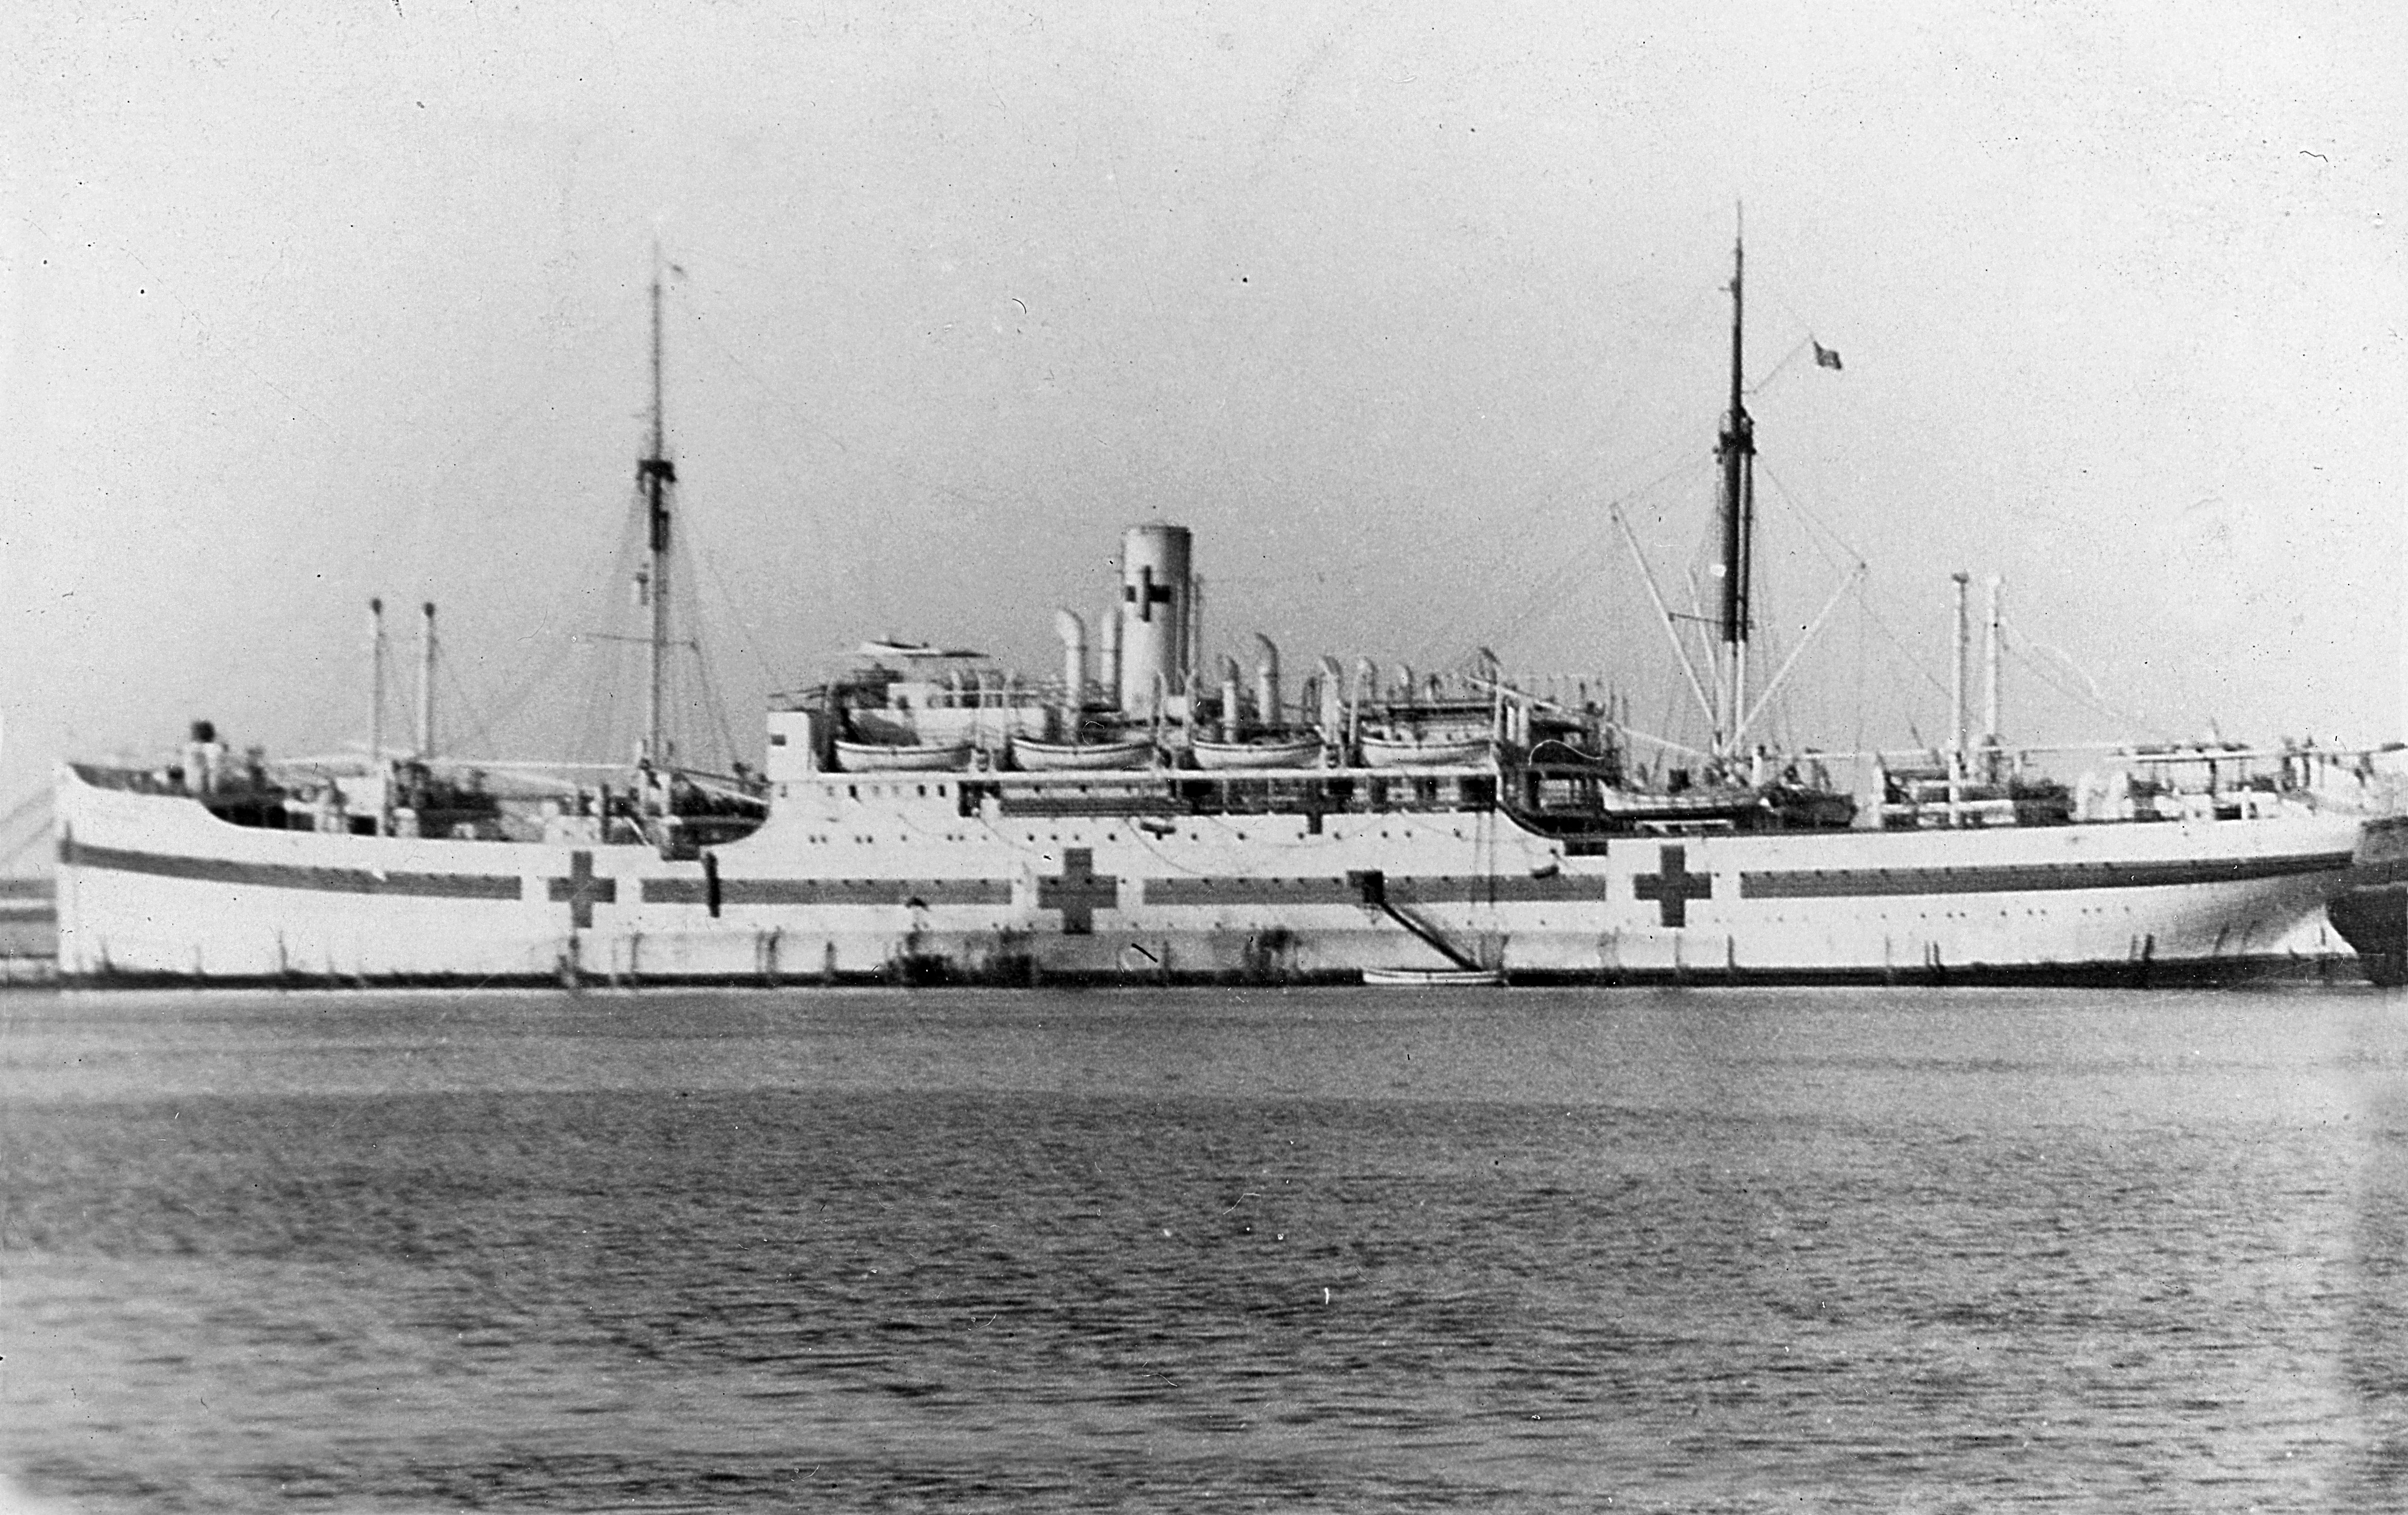 RNO Toscana in service in 1942 (Immage Credit Ing.Maurizio Eliseo)